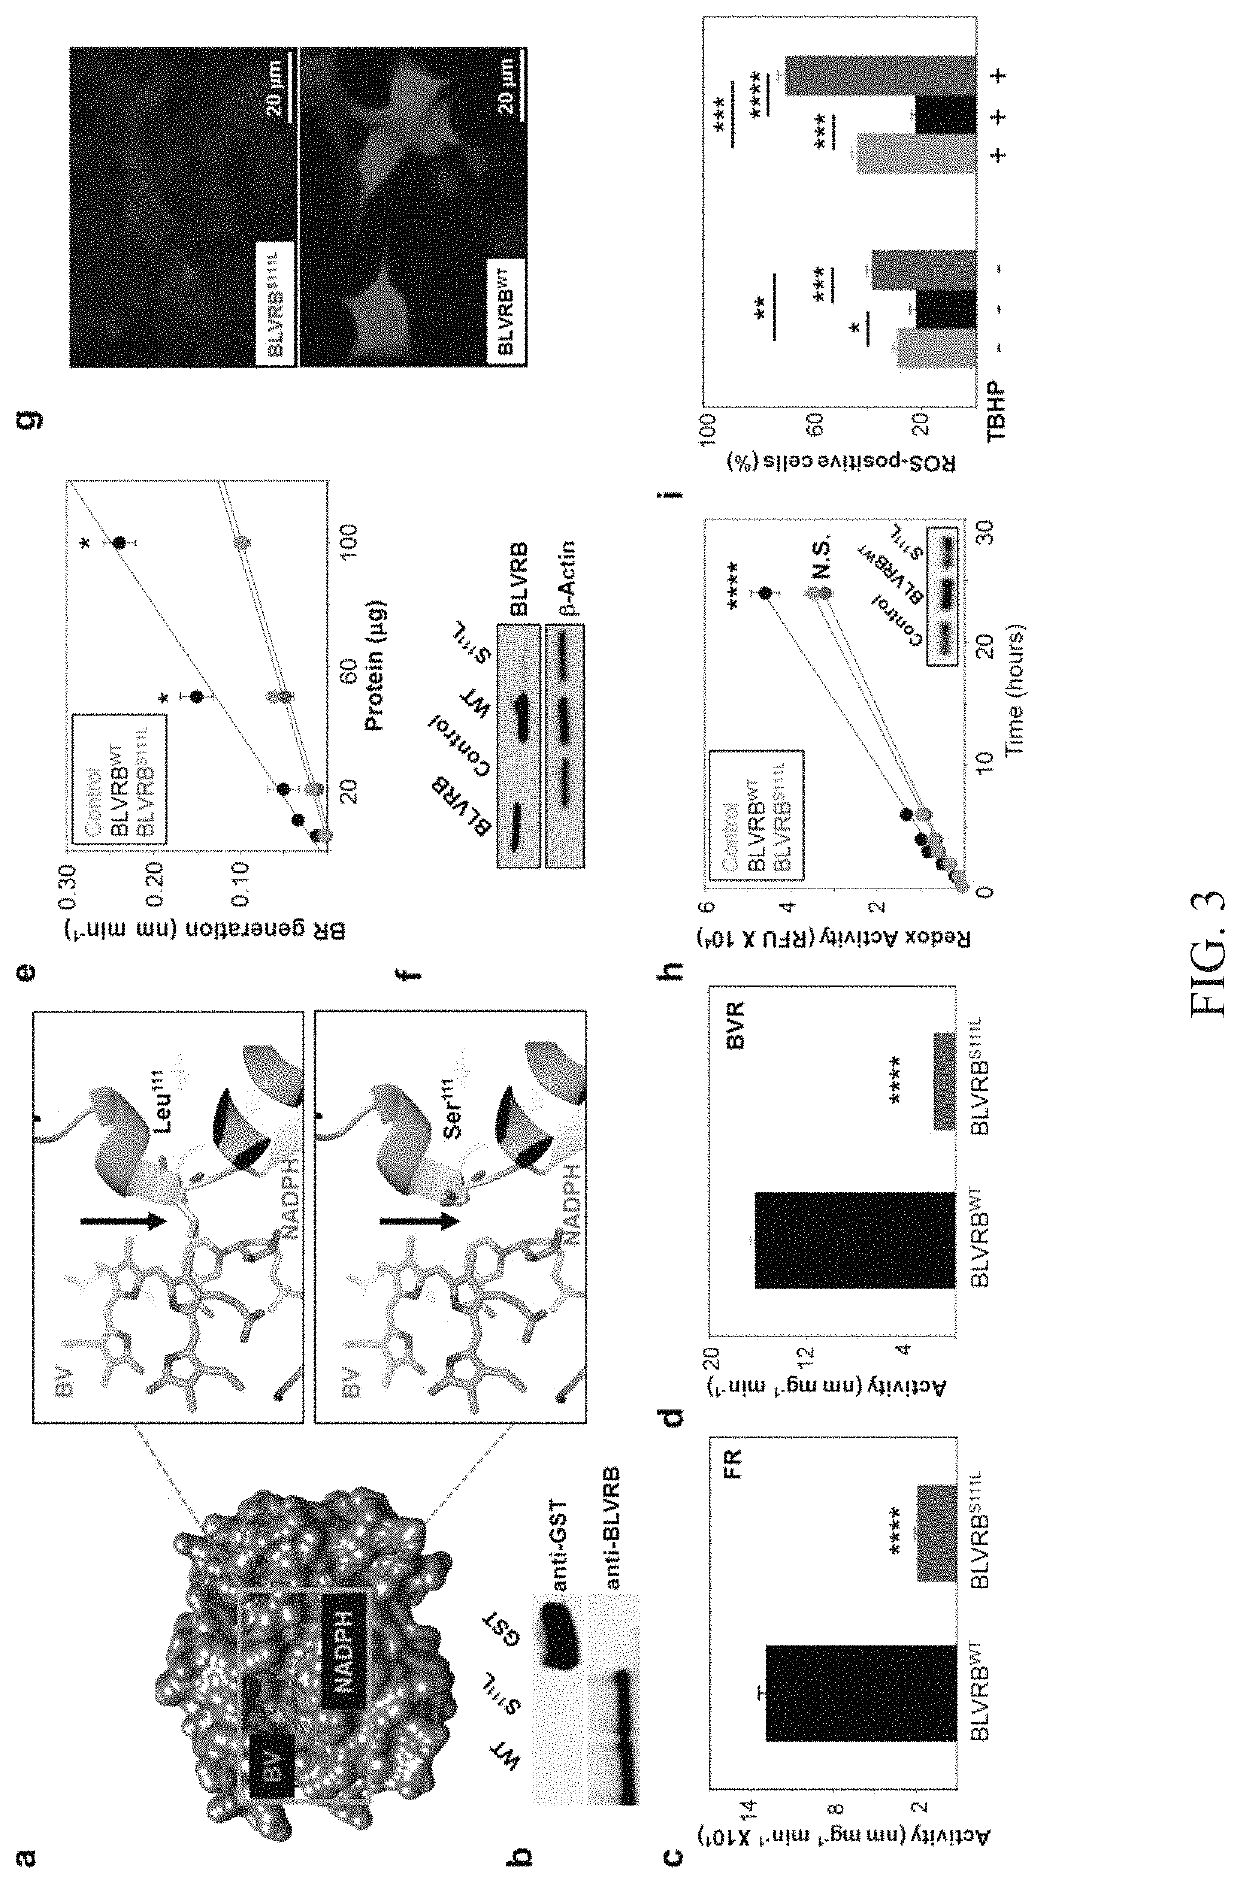 Methods for increasing platelet count by inhibiting biliverdin IXβ reductase